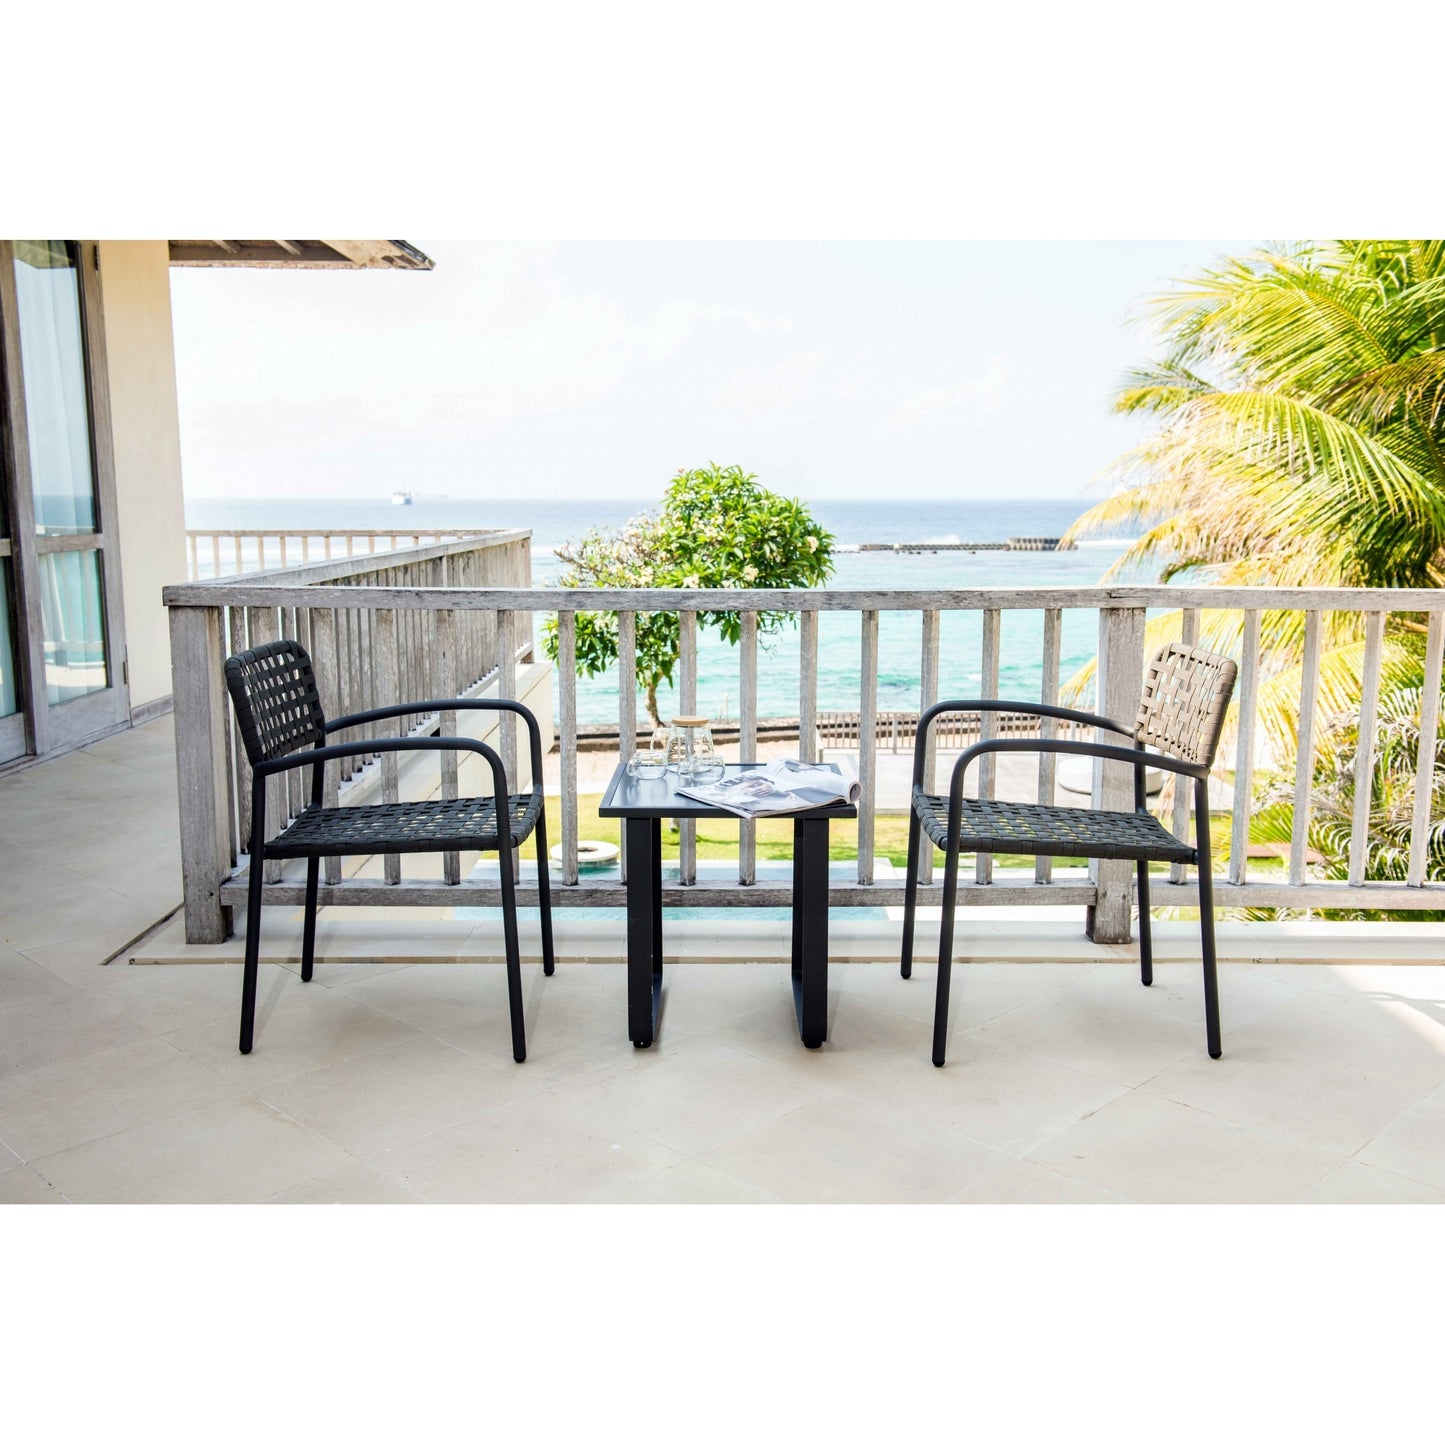 Catania Carbon Dining Chair - PadioLiving - Catania Carbon Dining Chair - Outdoor Dining Chair - PadioLiving